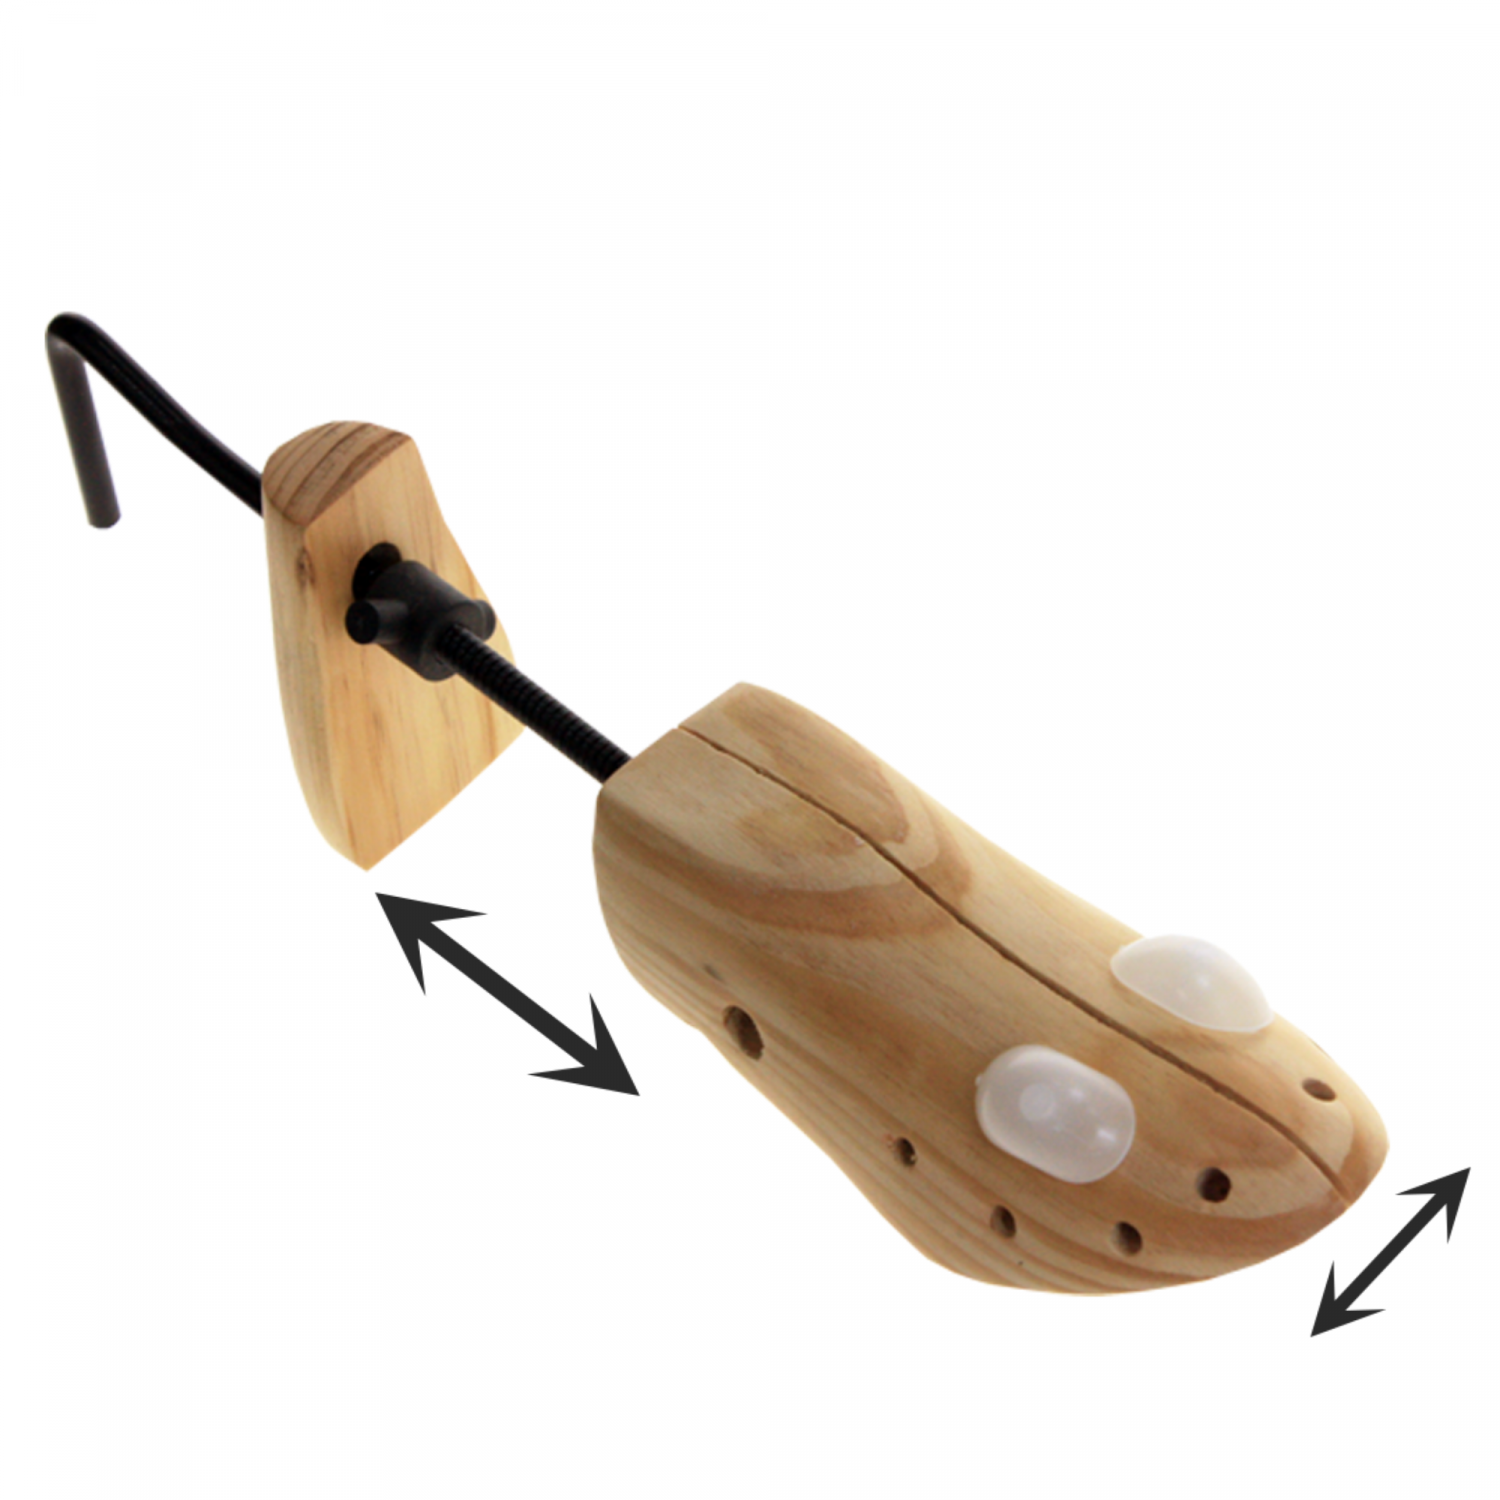 shoe stretcher, stretching a shoe, stretch shoes, wooden shoe stretcher, shoe stretcher wood, shoe stretcher wooden, dropshipping, wholesale, supplier